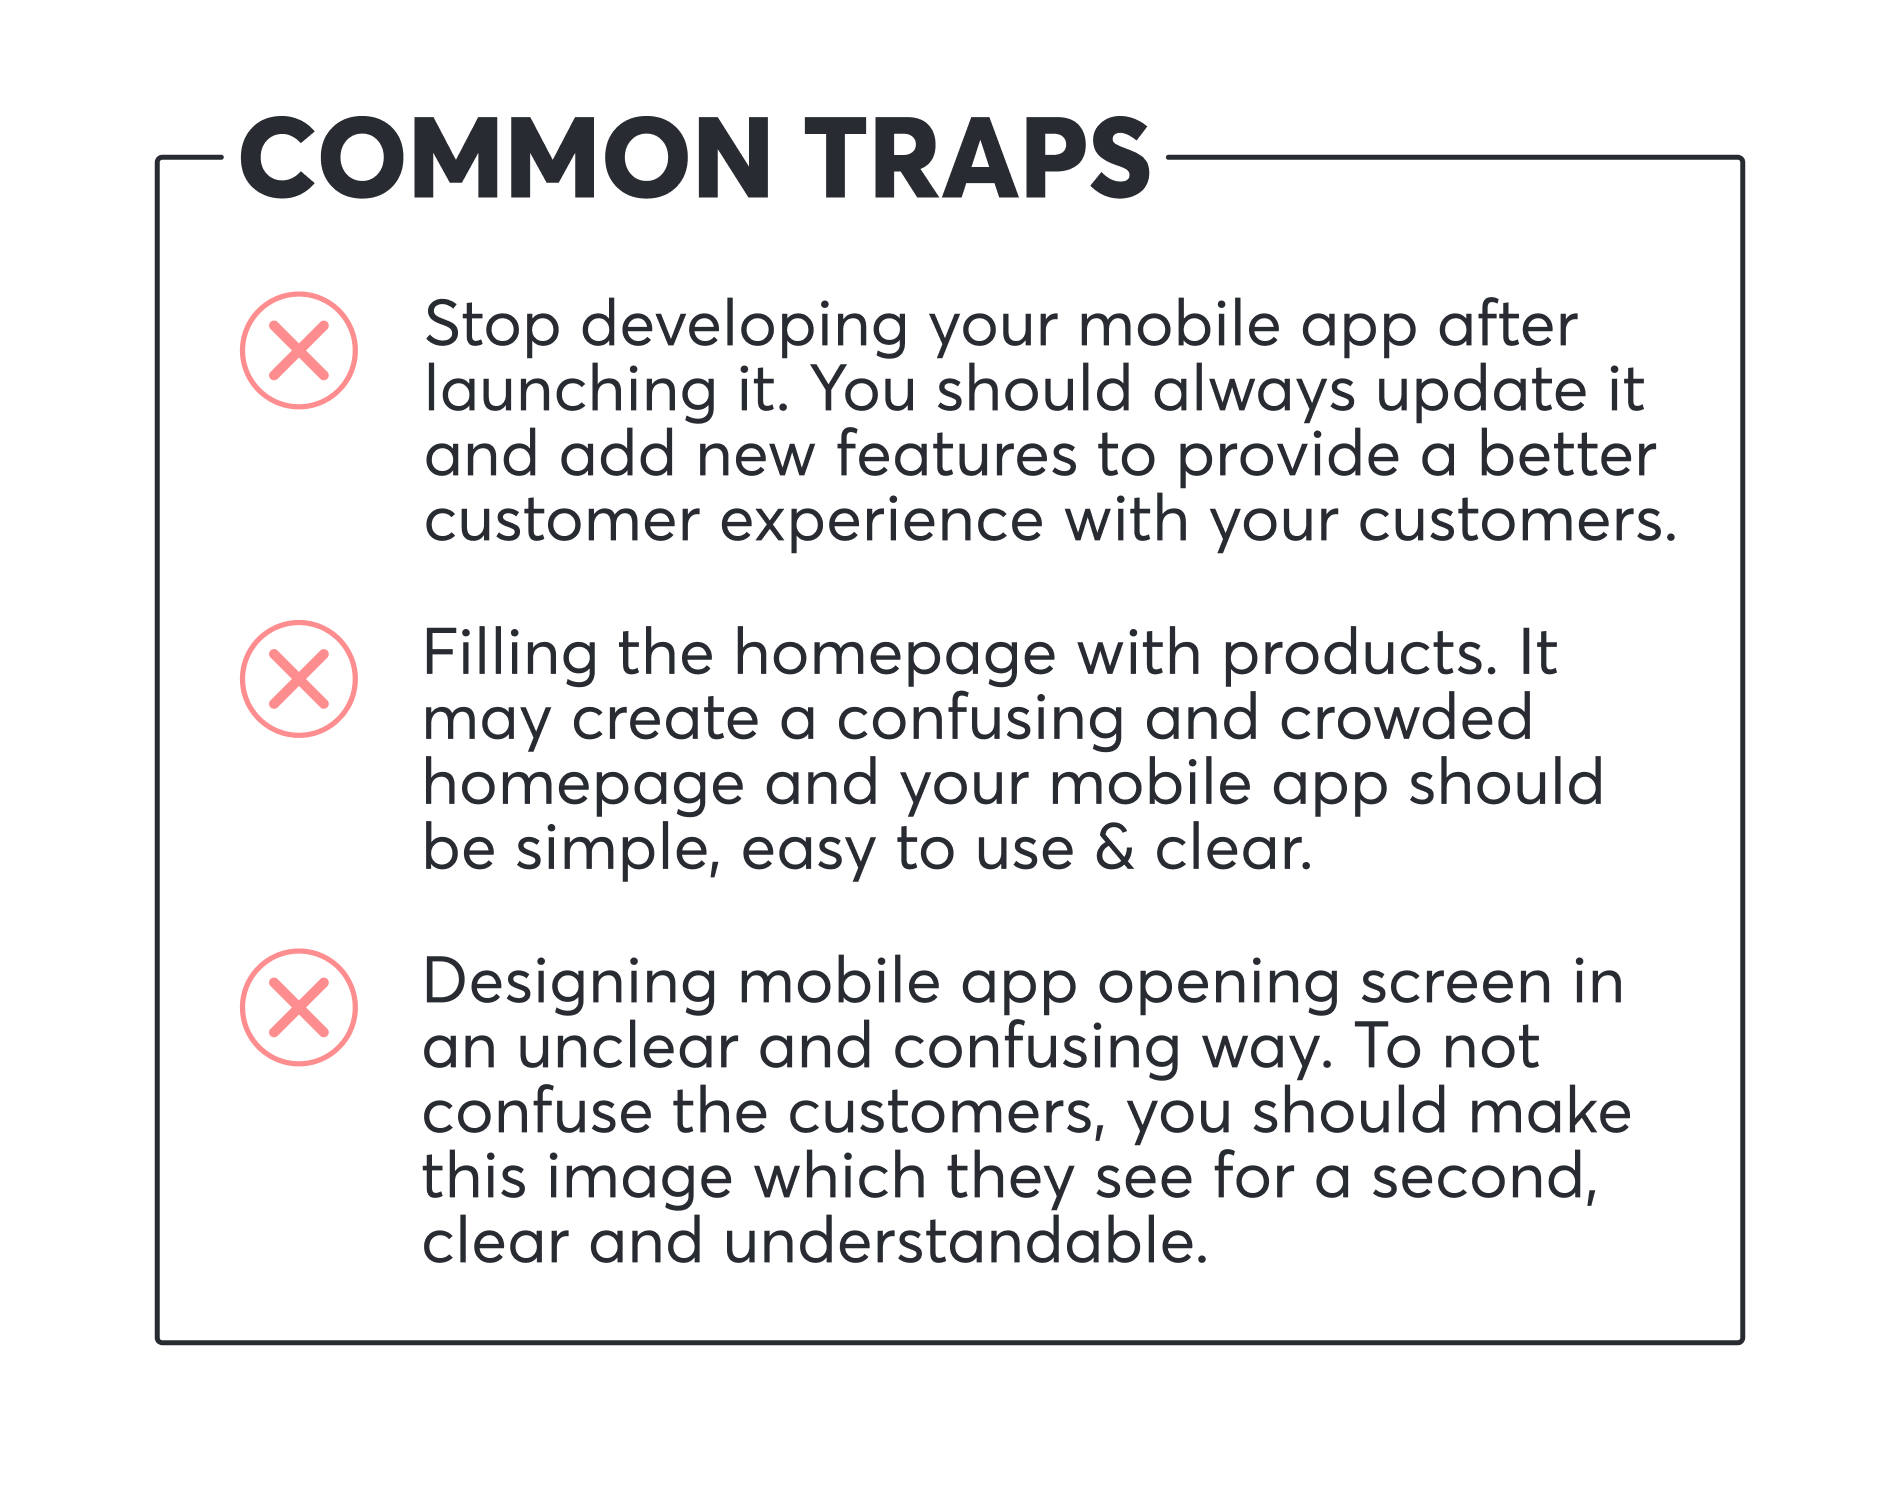 Common Traps to Turn your Shopify Store Into a Mobile App